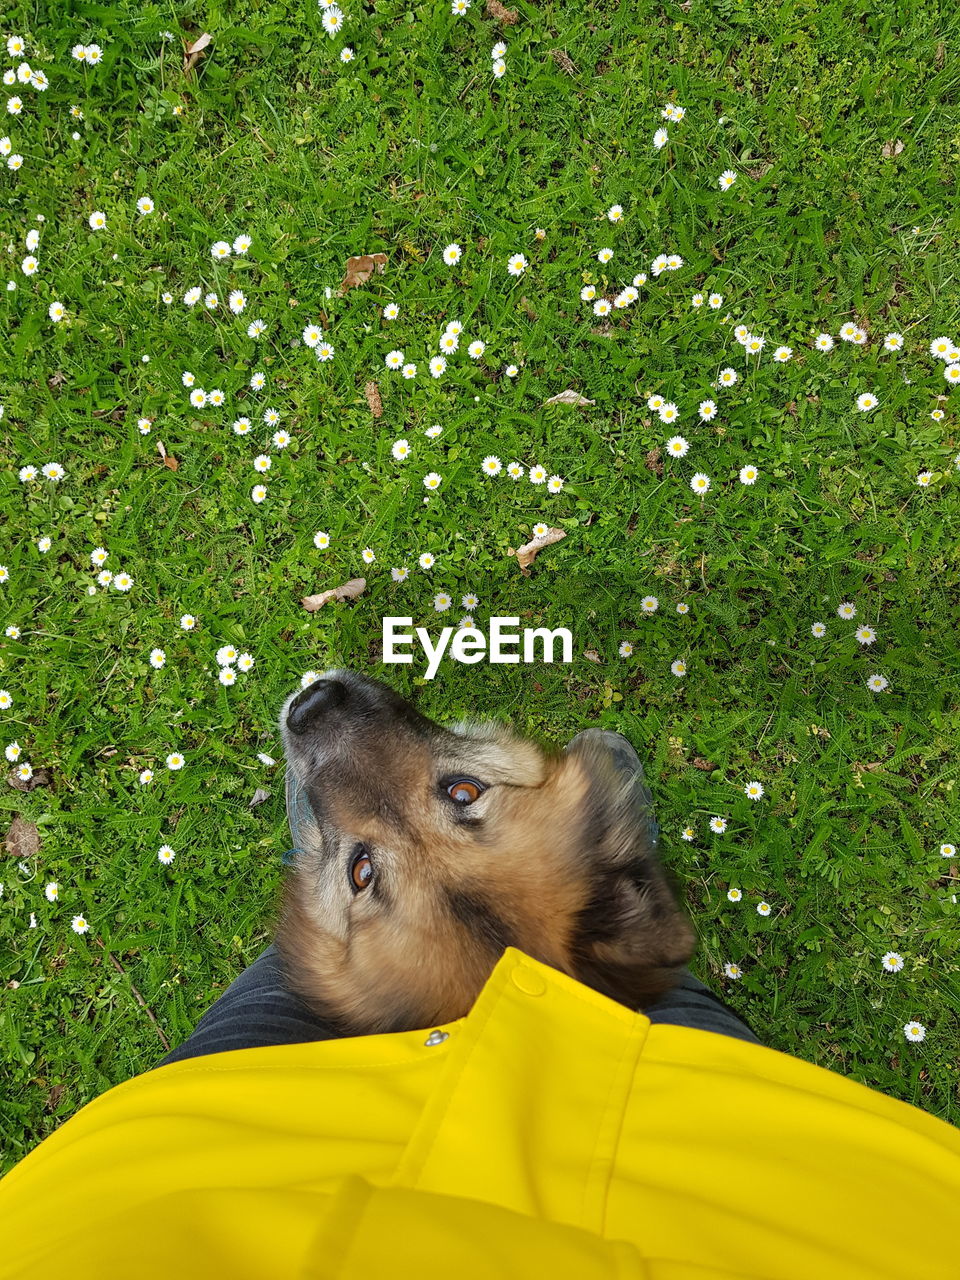 HIGH ANGLE VIEW OF A DOG ON GRASSY FIELD